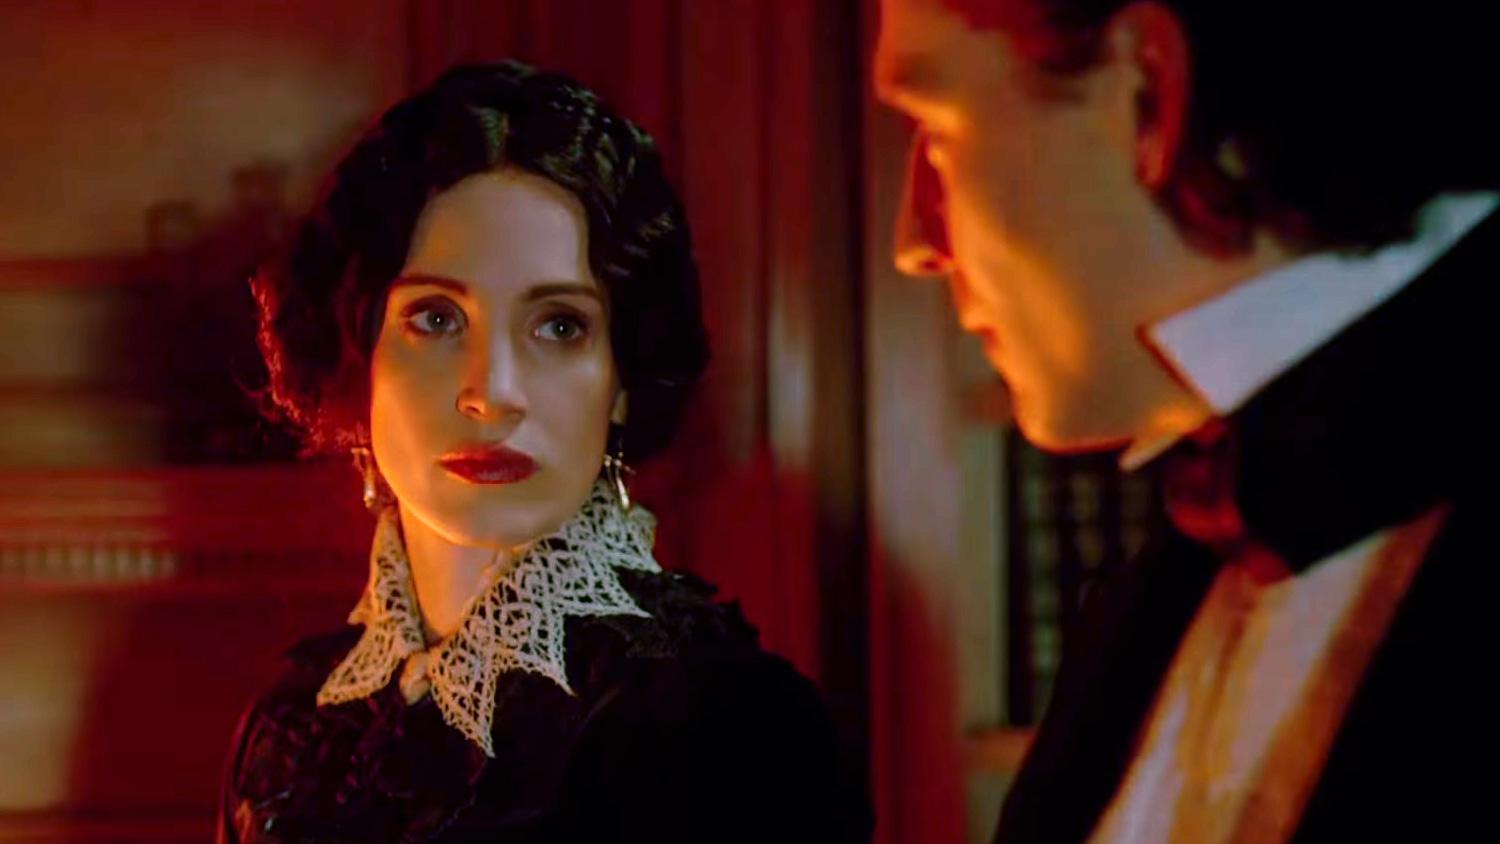 Jessica Chastain as Lady Lucille in Crimson Peak - HeadStuff.org